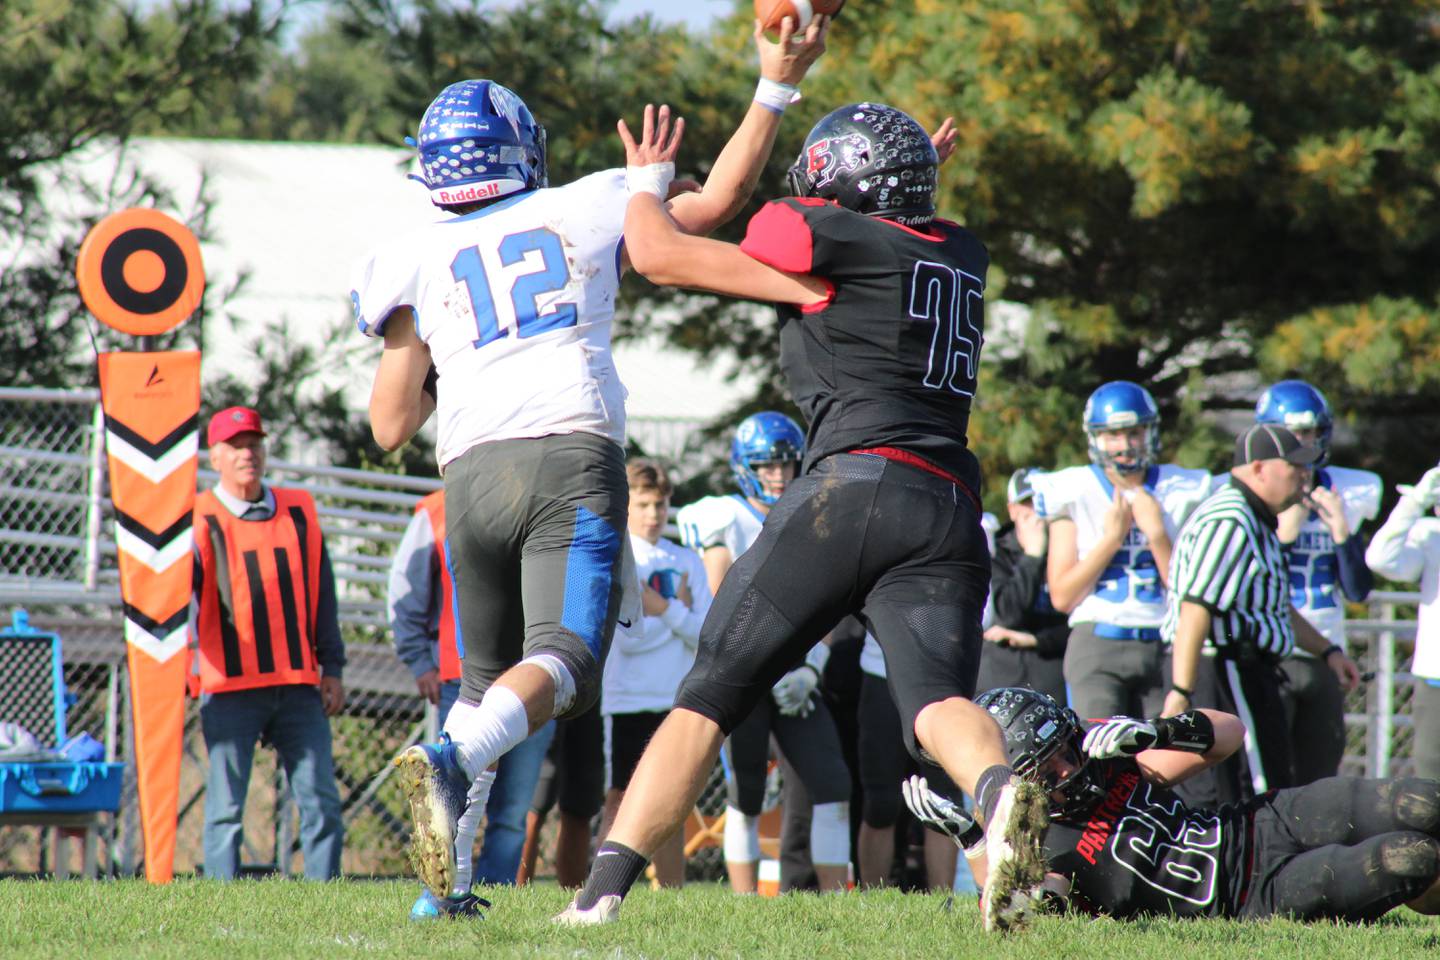 Erie-Prophetstown lineman Nick Ballard (75) pressures Clifton Central quarterback Luke Shoven (12) on Saturday, Oct. 30, 2021, in a Class 2A playoff game at Erie High School.  Shoven through three interceptions and was sacked once by Ballard.